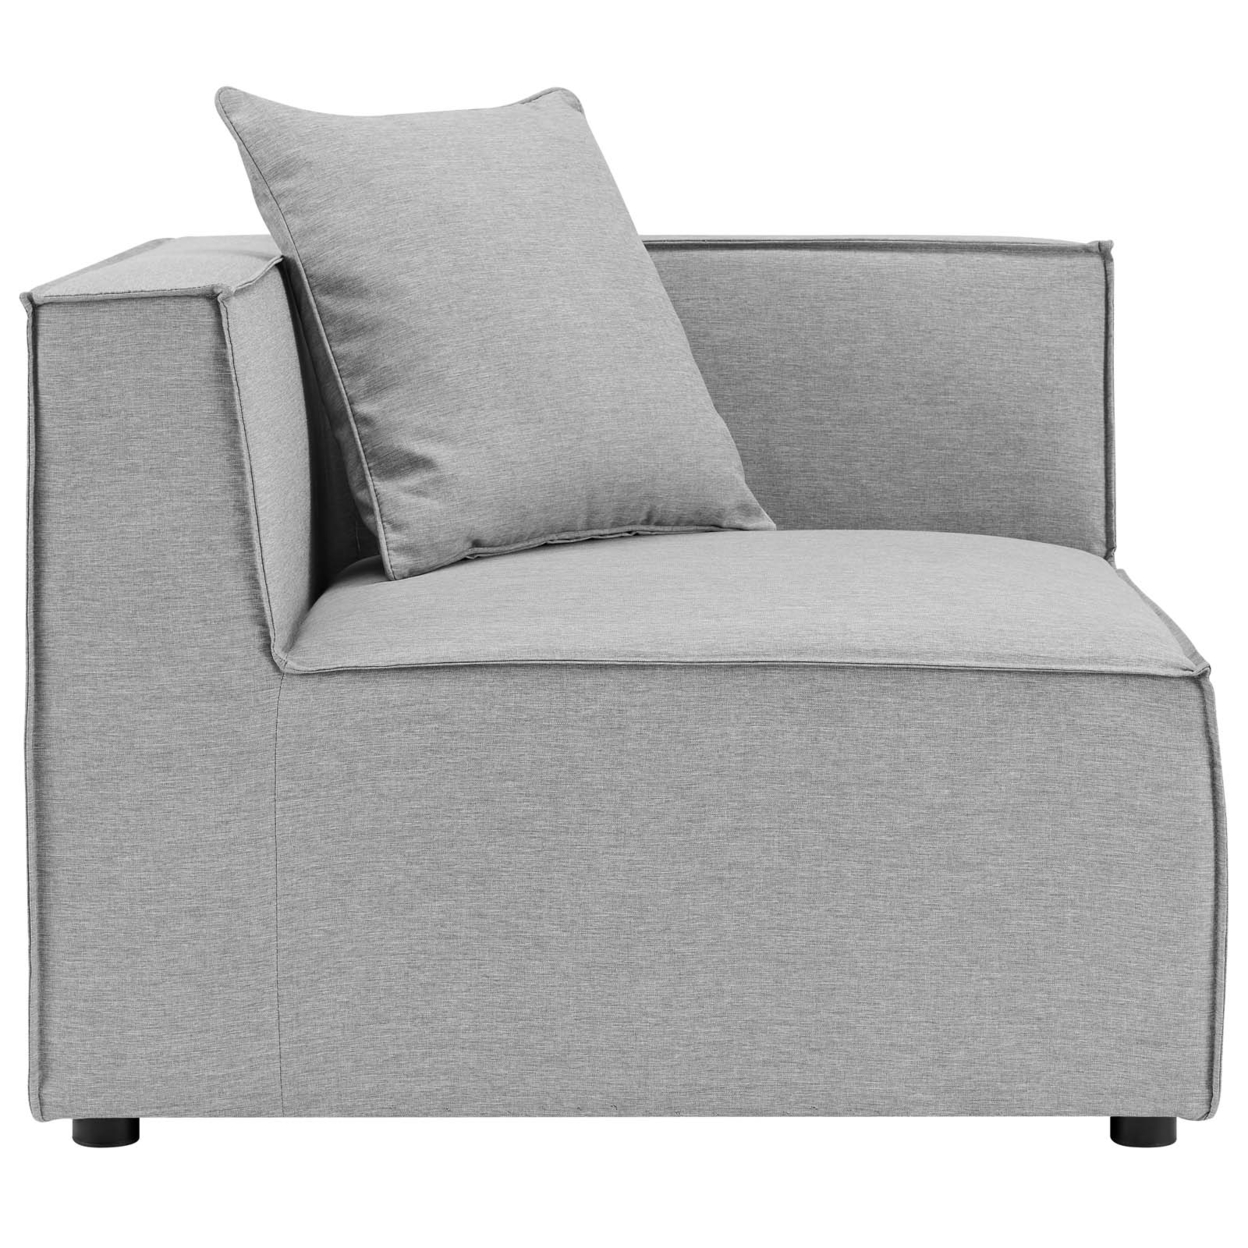 Saybrook Outdoor Patio Upholstered 2-Piece Sectional Sofa Loveseat, Gray